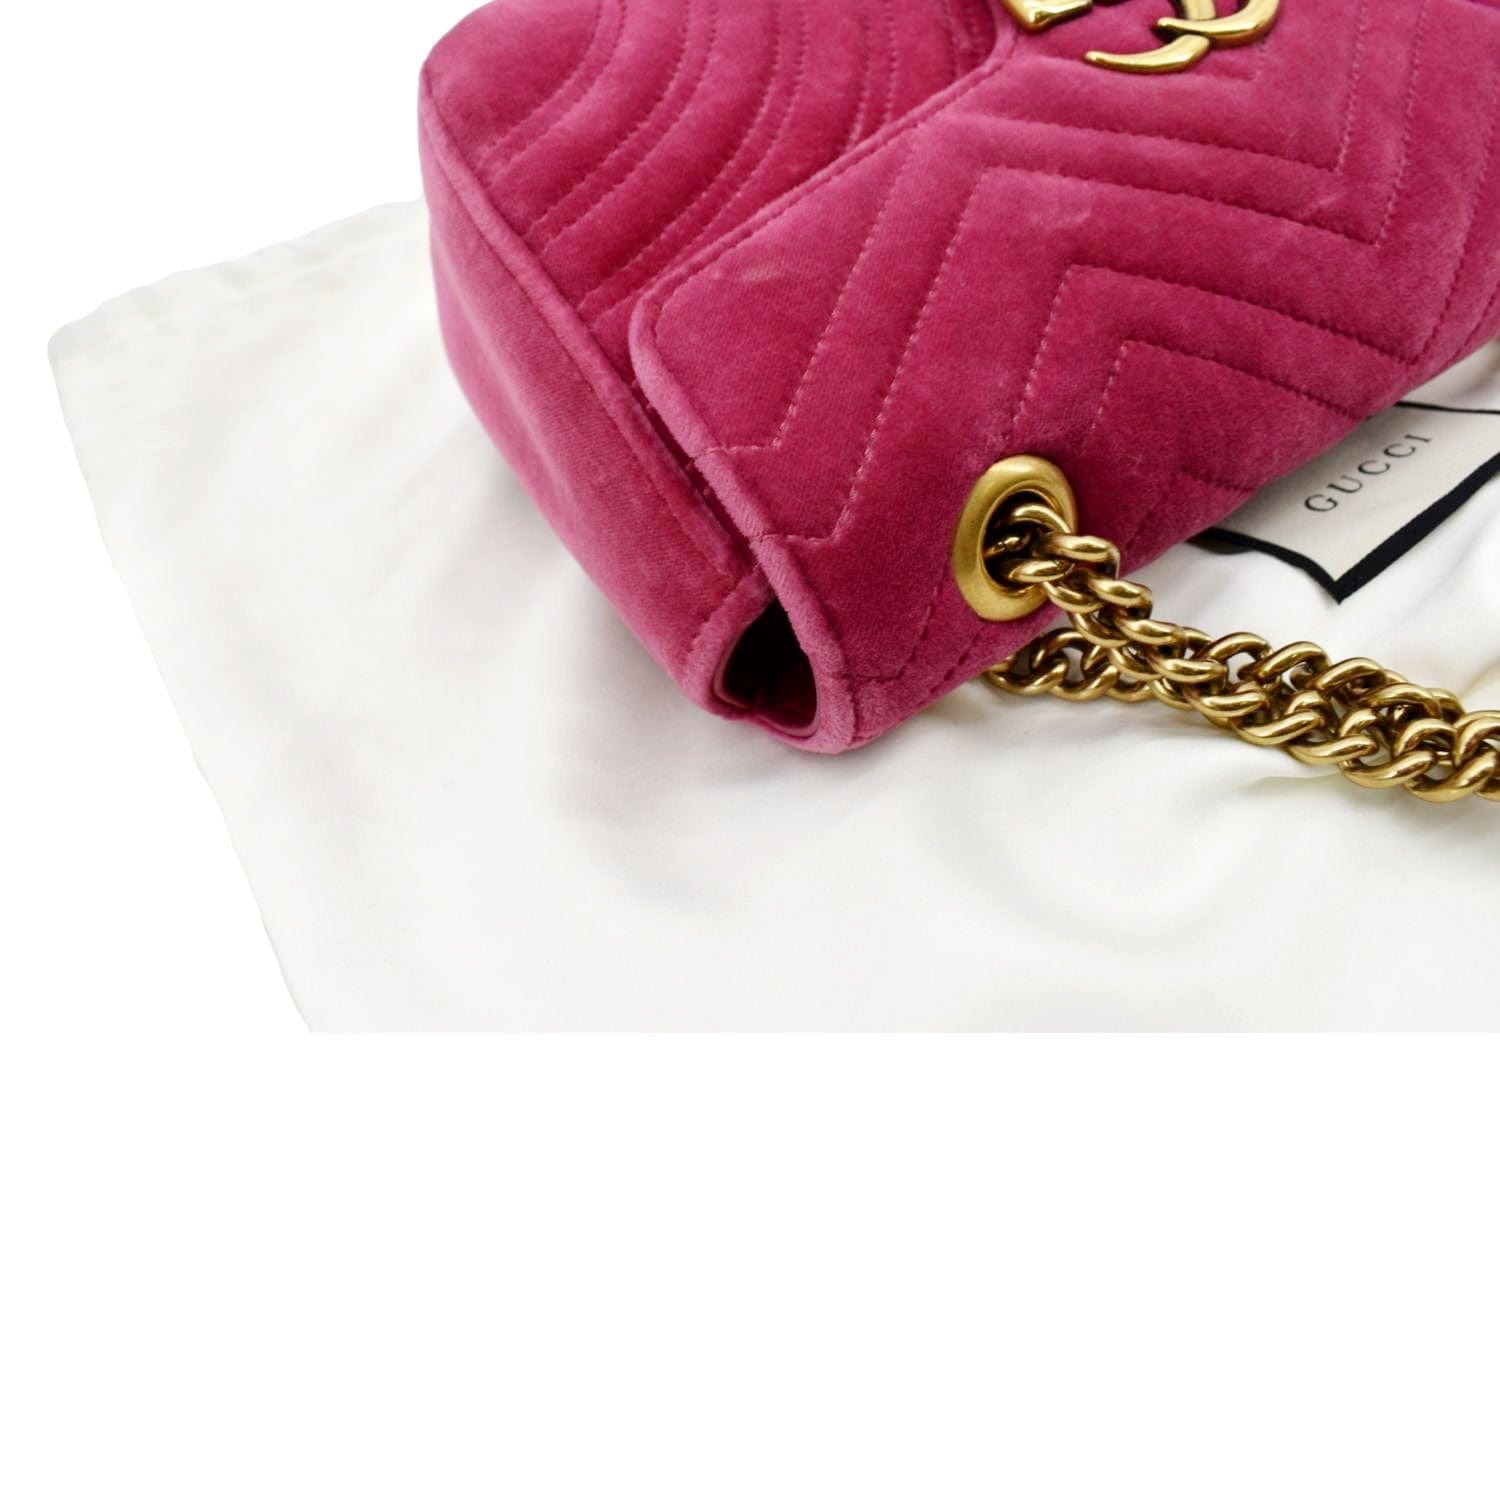 Gucci GG Marmont Velvet Small Crossbody Bag in Pink